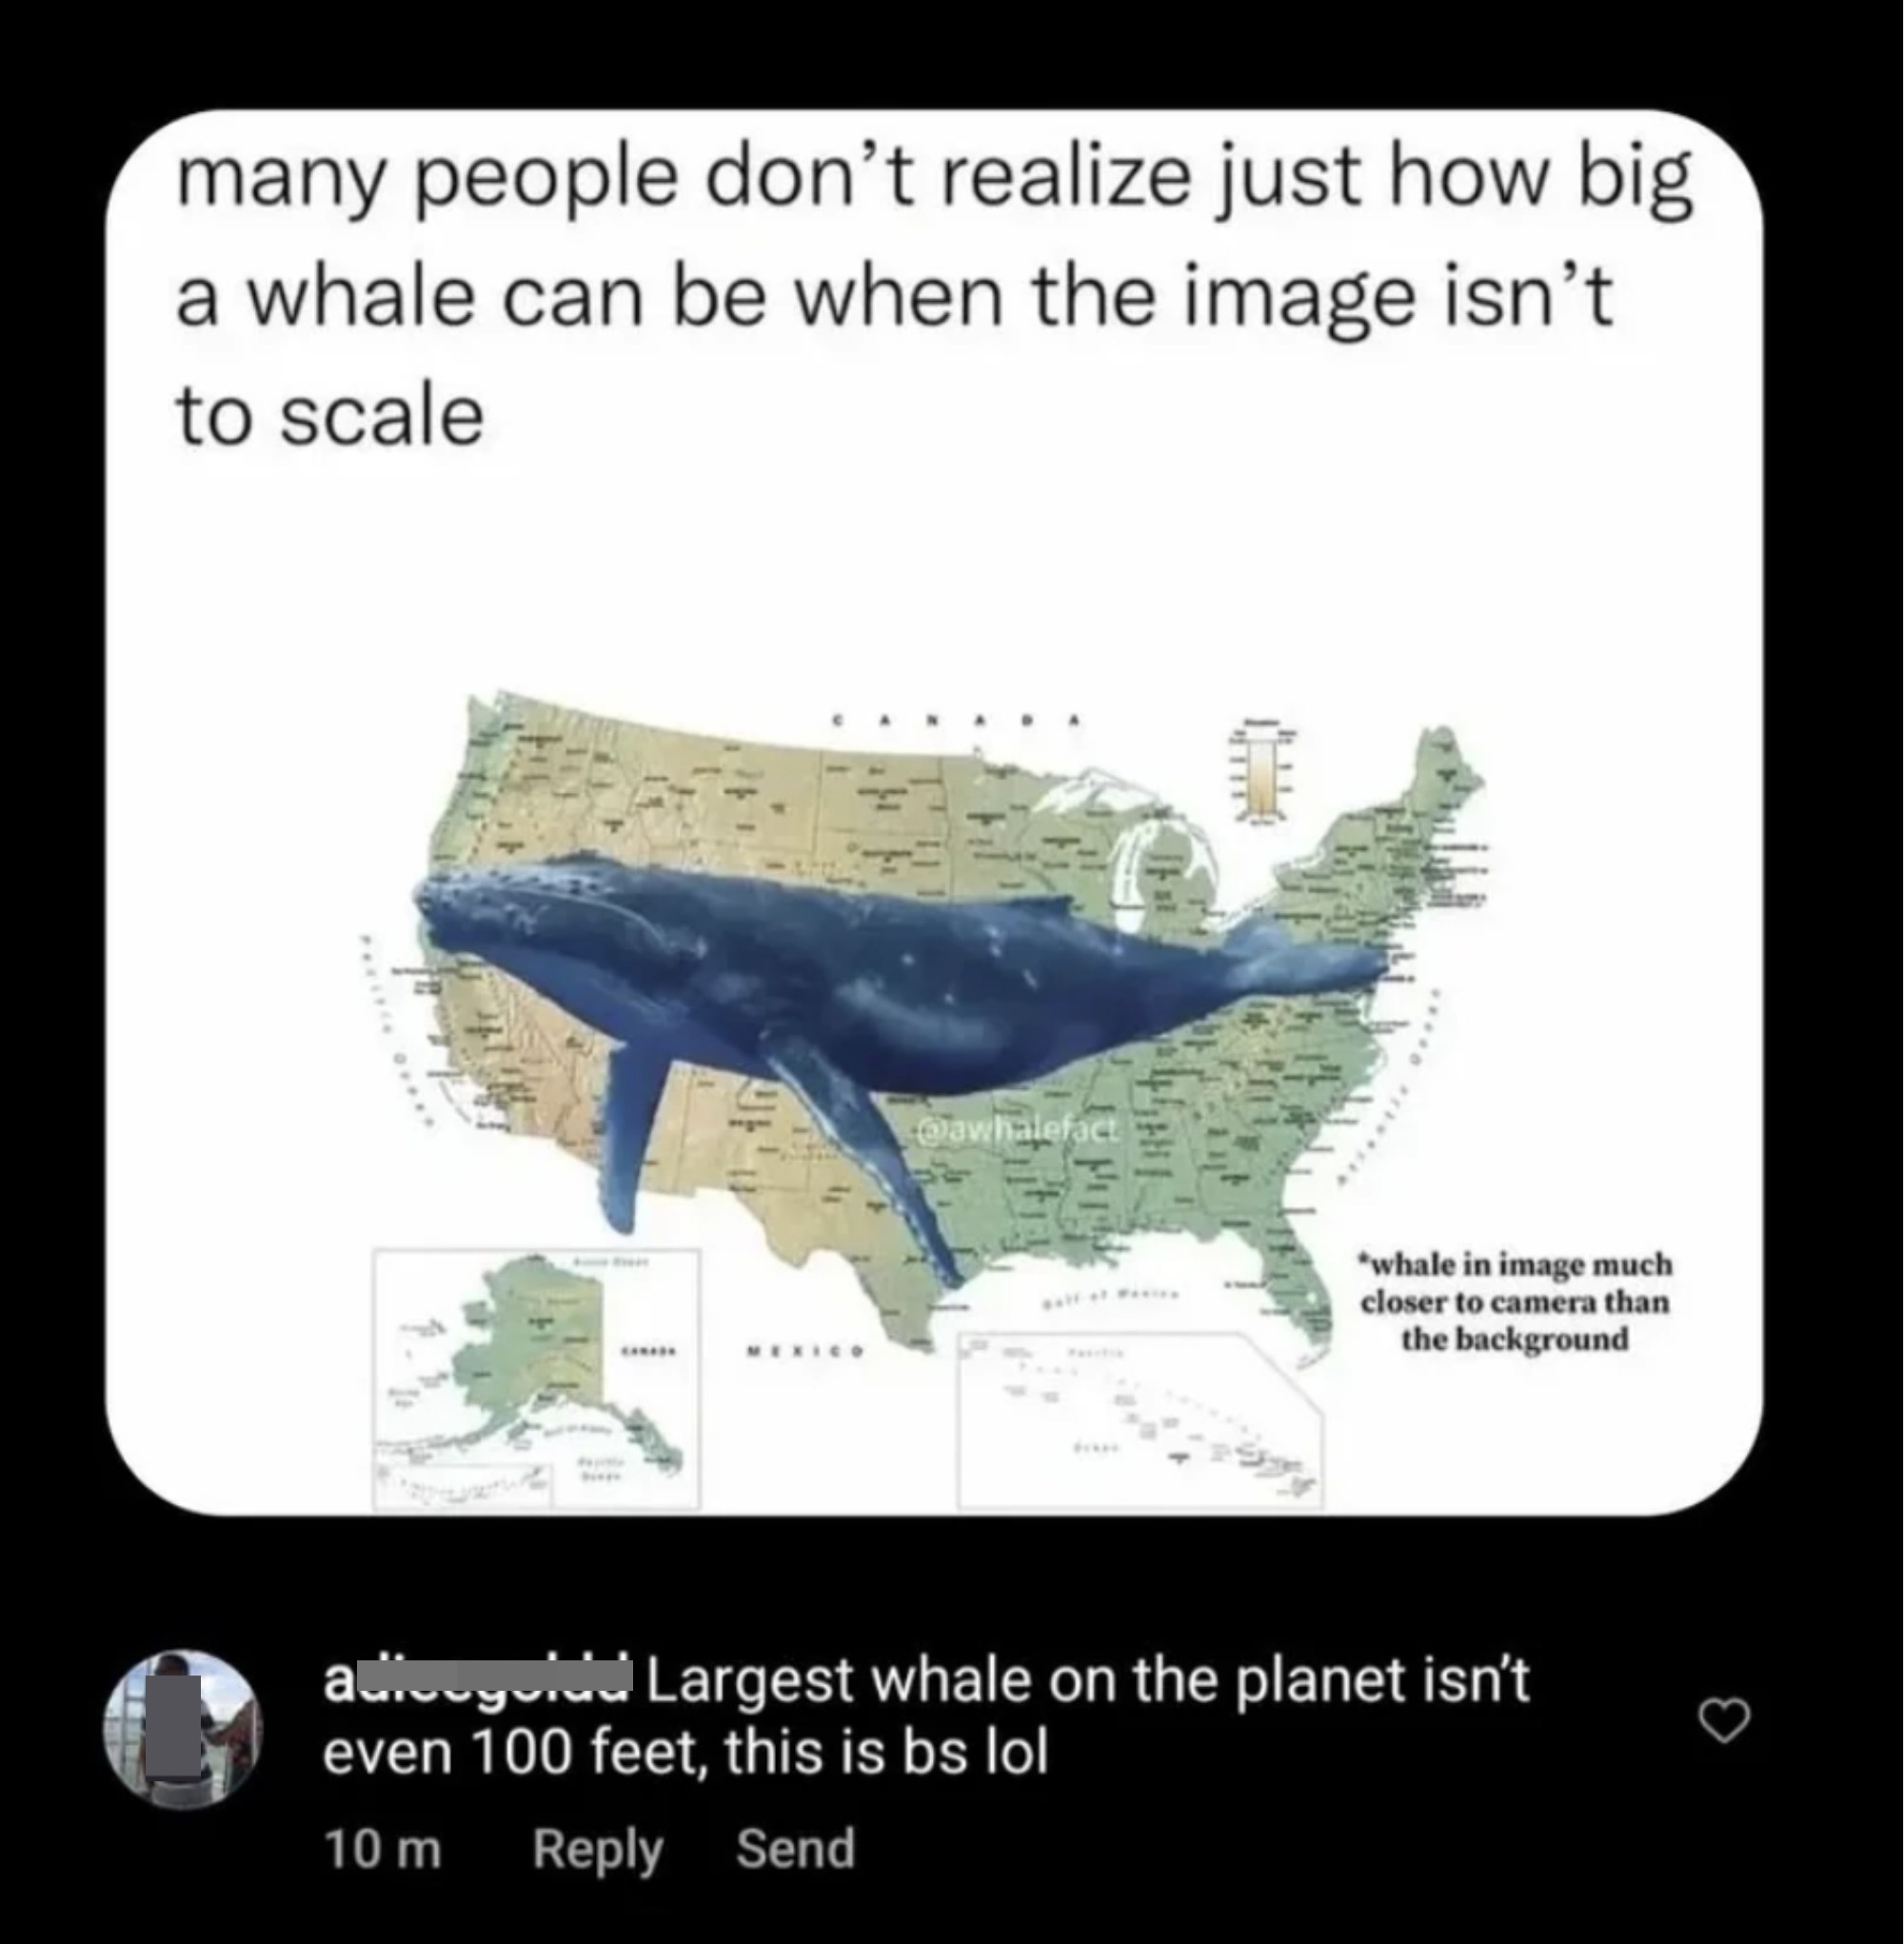 "Largest whale on the planet isn't even 100 feet, this is bs lol"